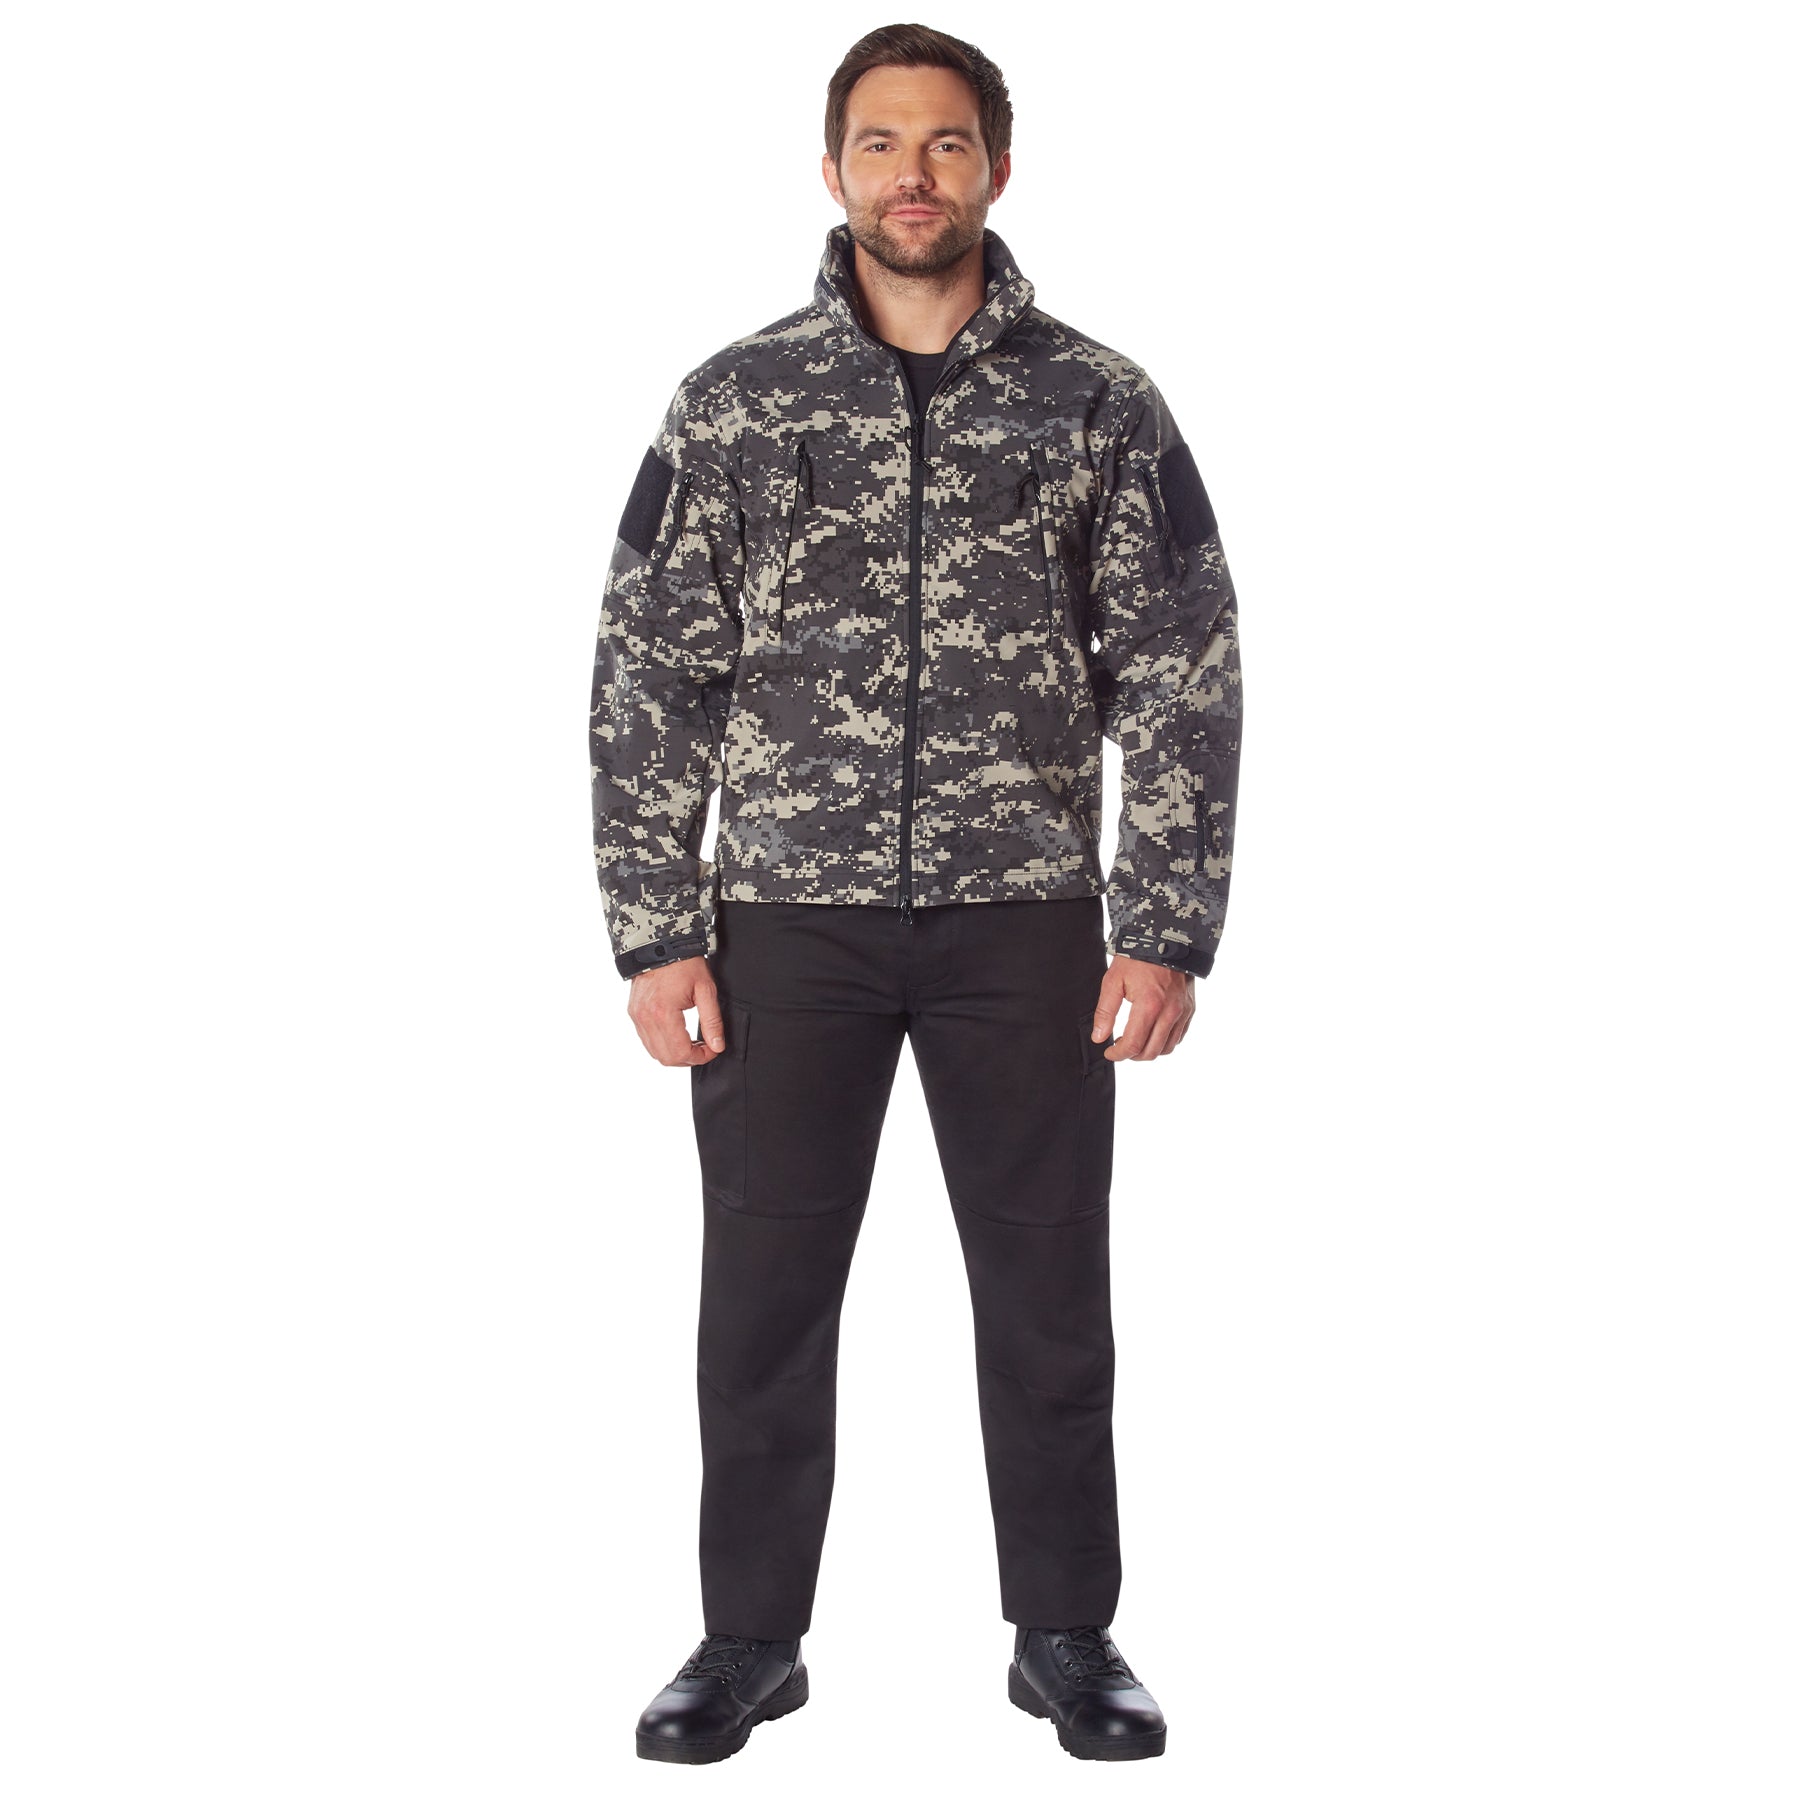 Poly Digital Camo Spec Ops Tactical Soft Shell Jackets